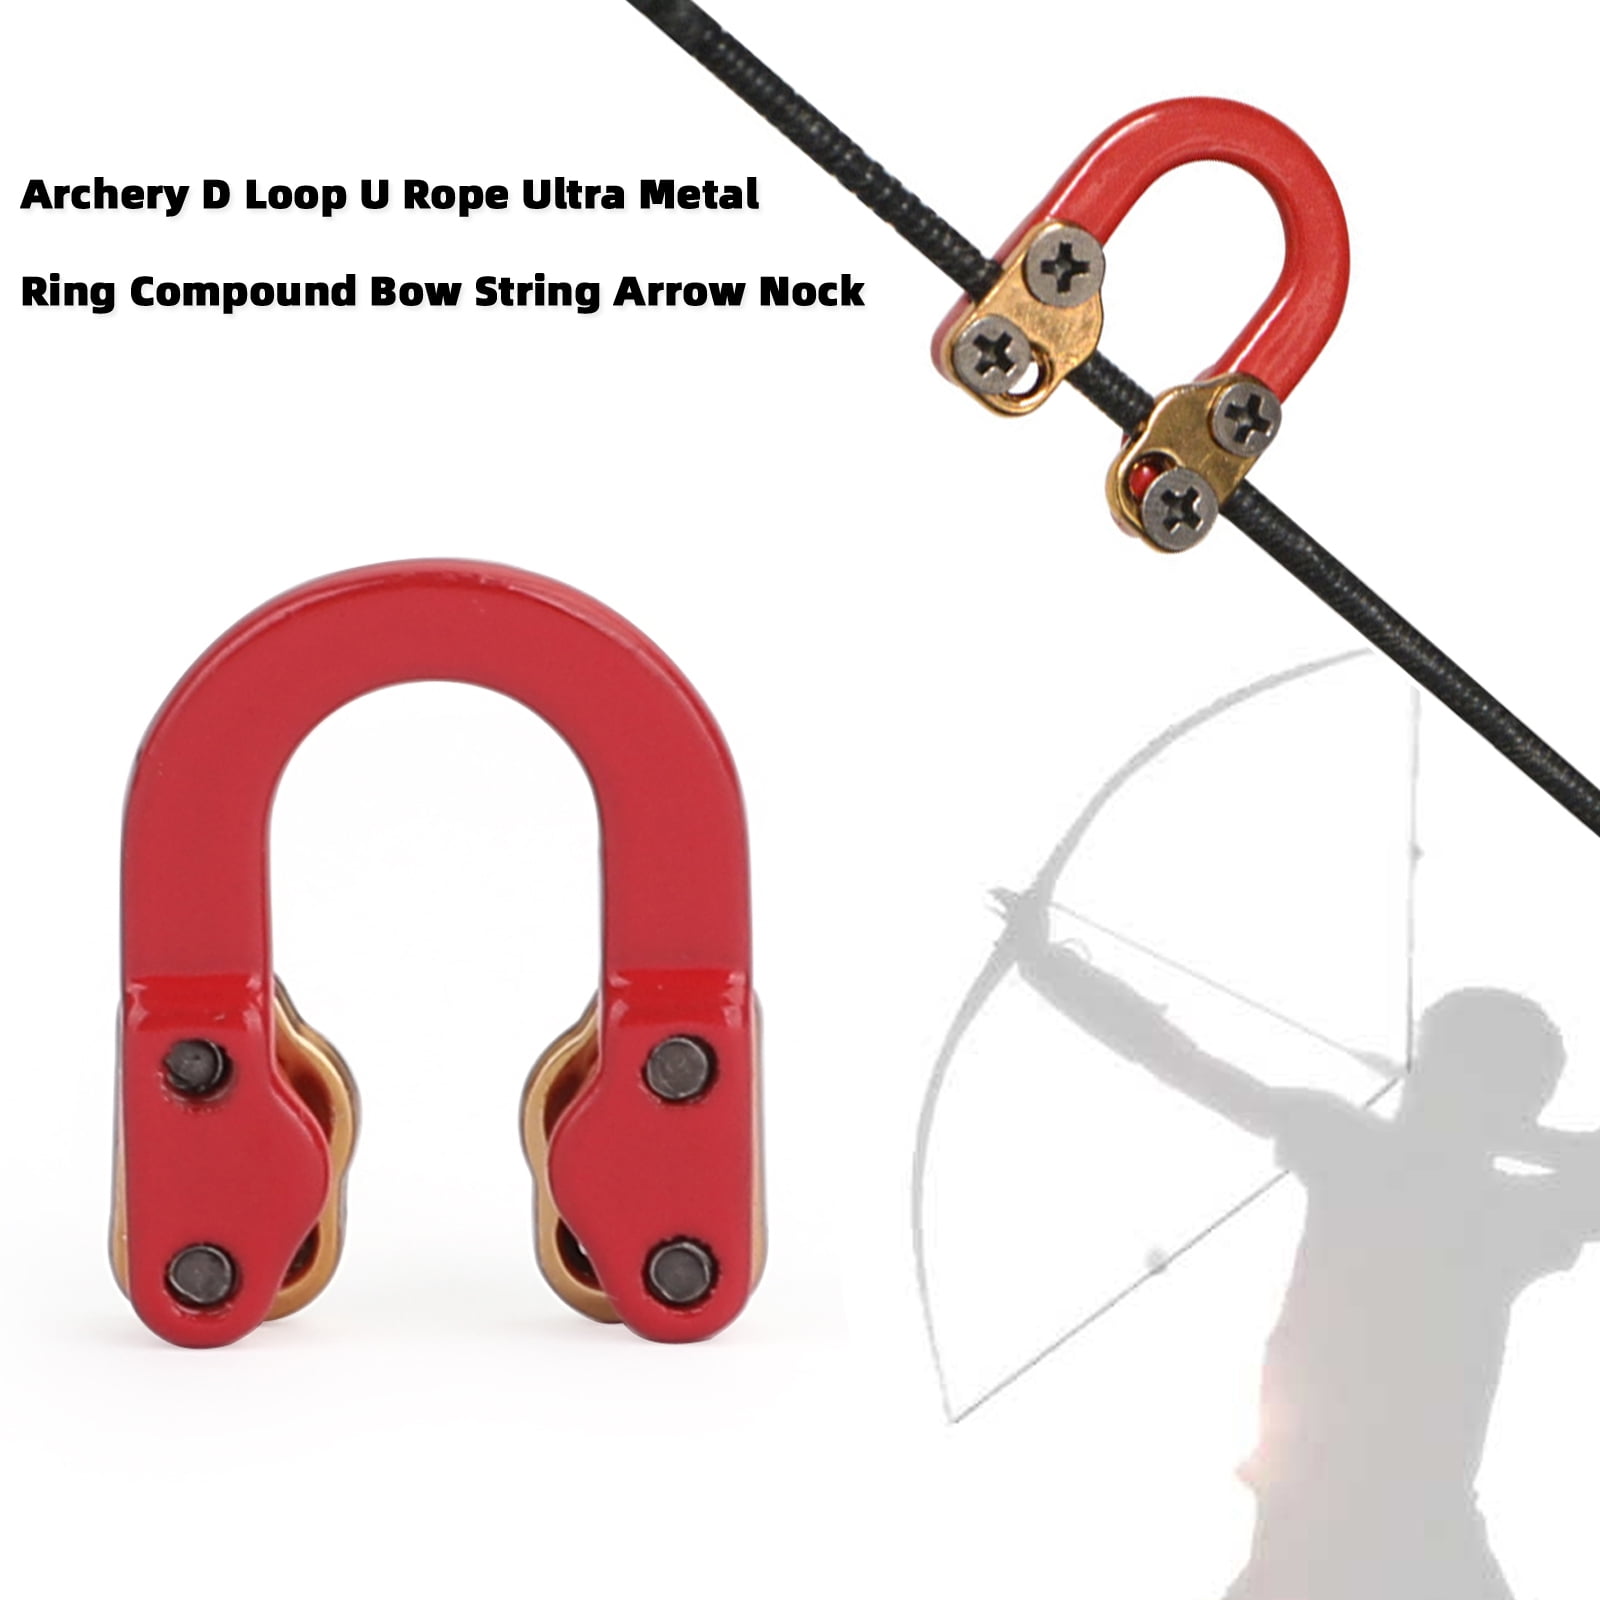 Archery Metal D Loop Release Bow Ring String Arrow U Nock Compound Bow